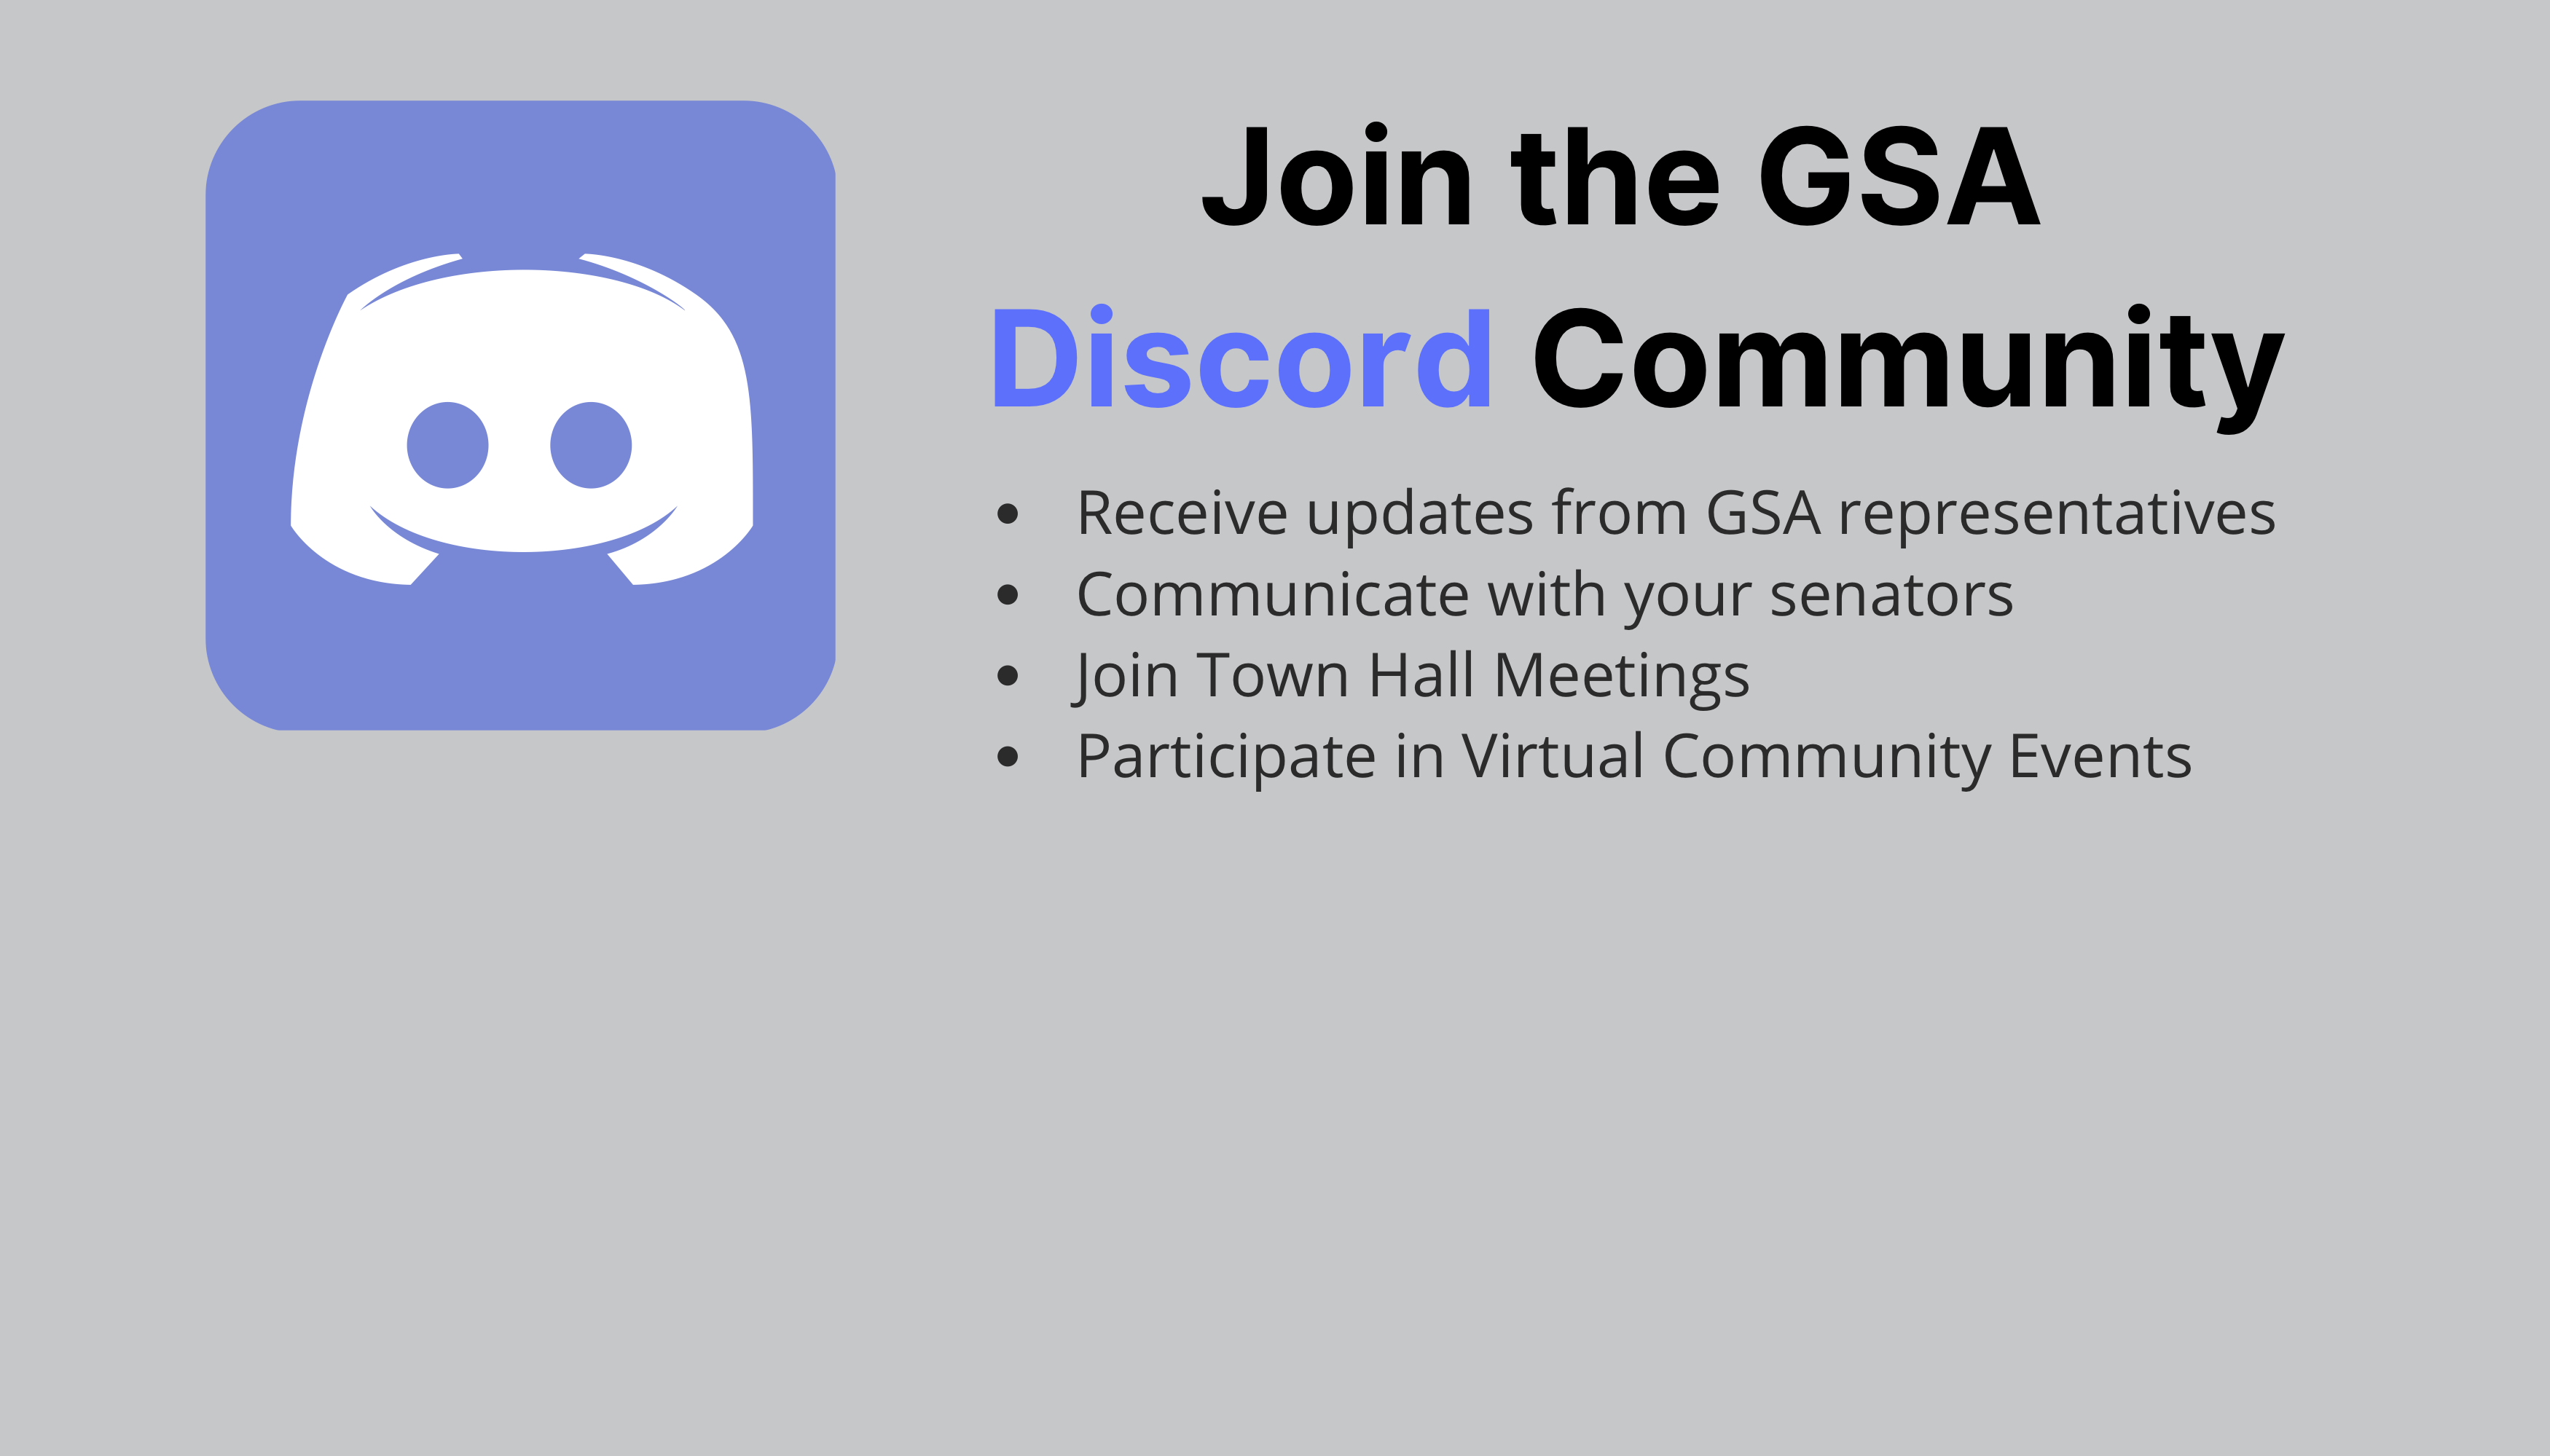 Join the GSA Discord Community